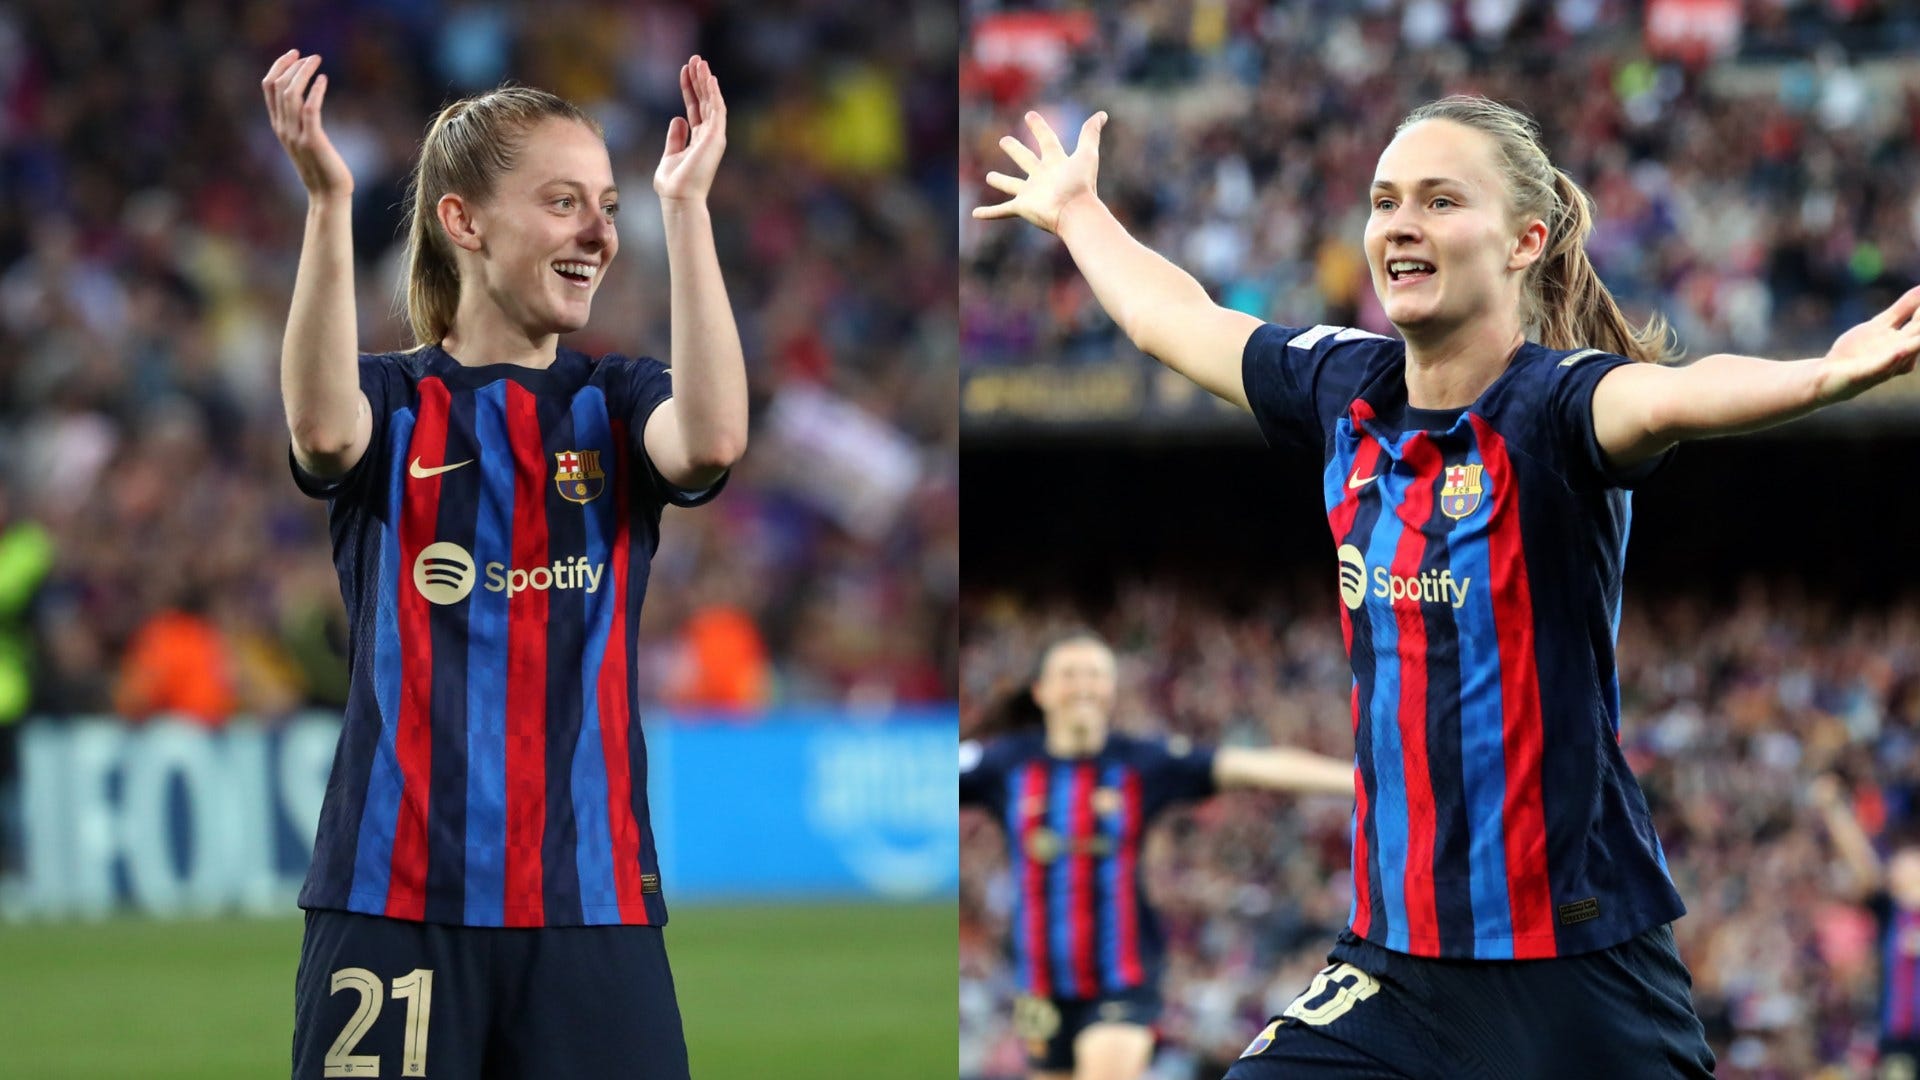 we-are-lucky-to-have-keira-walsh-at-barcelona-england-star-praised-by-team-mate-caroline-graham-hansen-ahead-of-women-s-champions-league-final-against-wolfsburg-or-goal-com-india